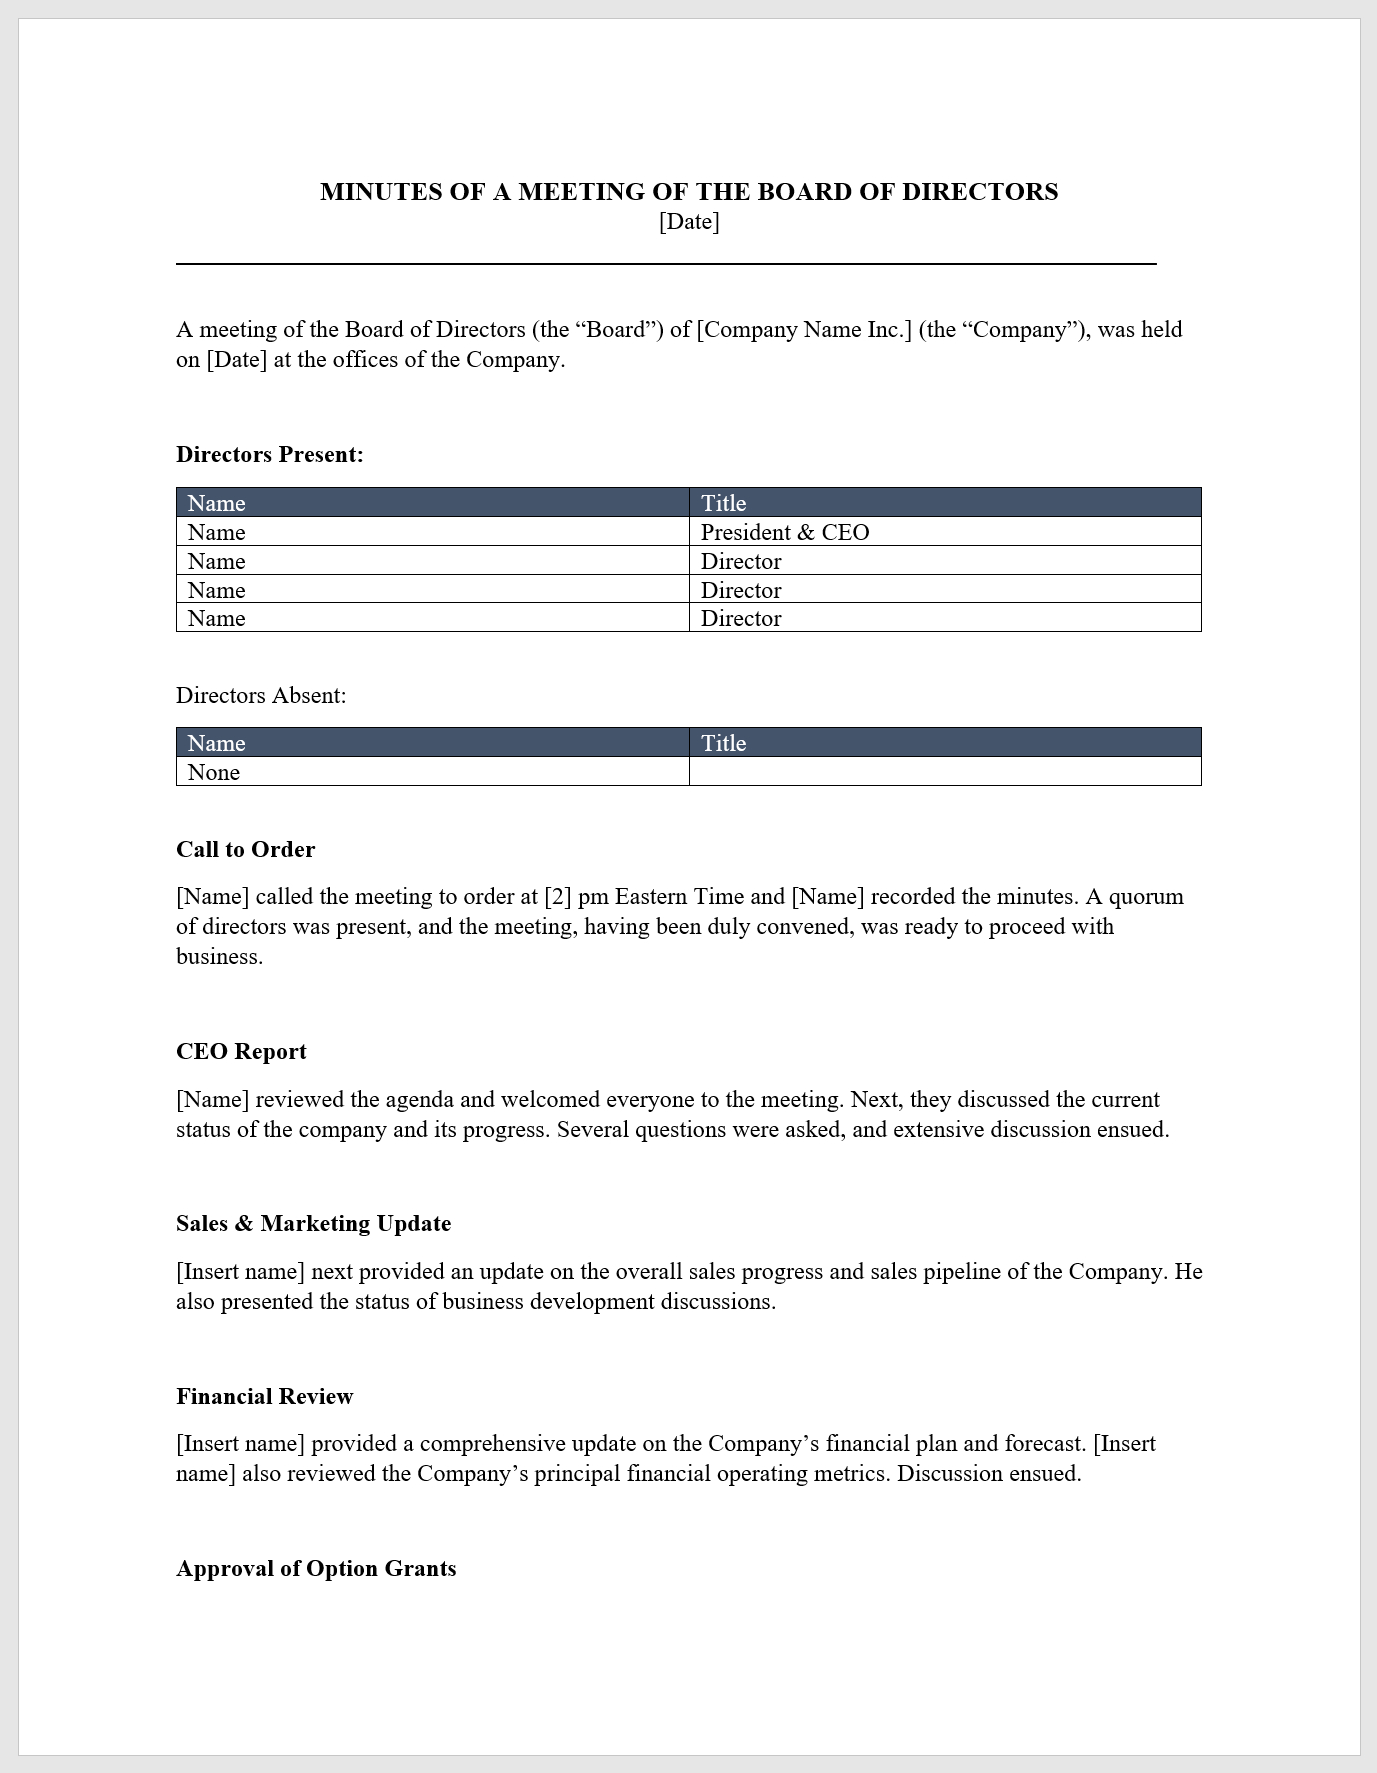 Board Meeting Minutes Template Download From Cfi Marketplace inside size 1377 X 1773